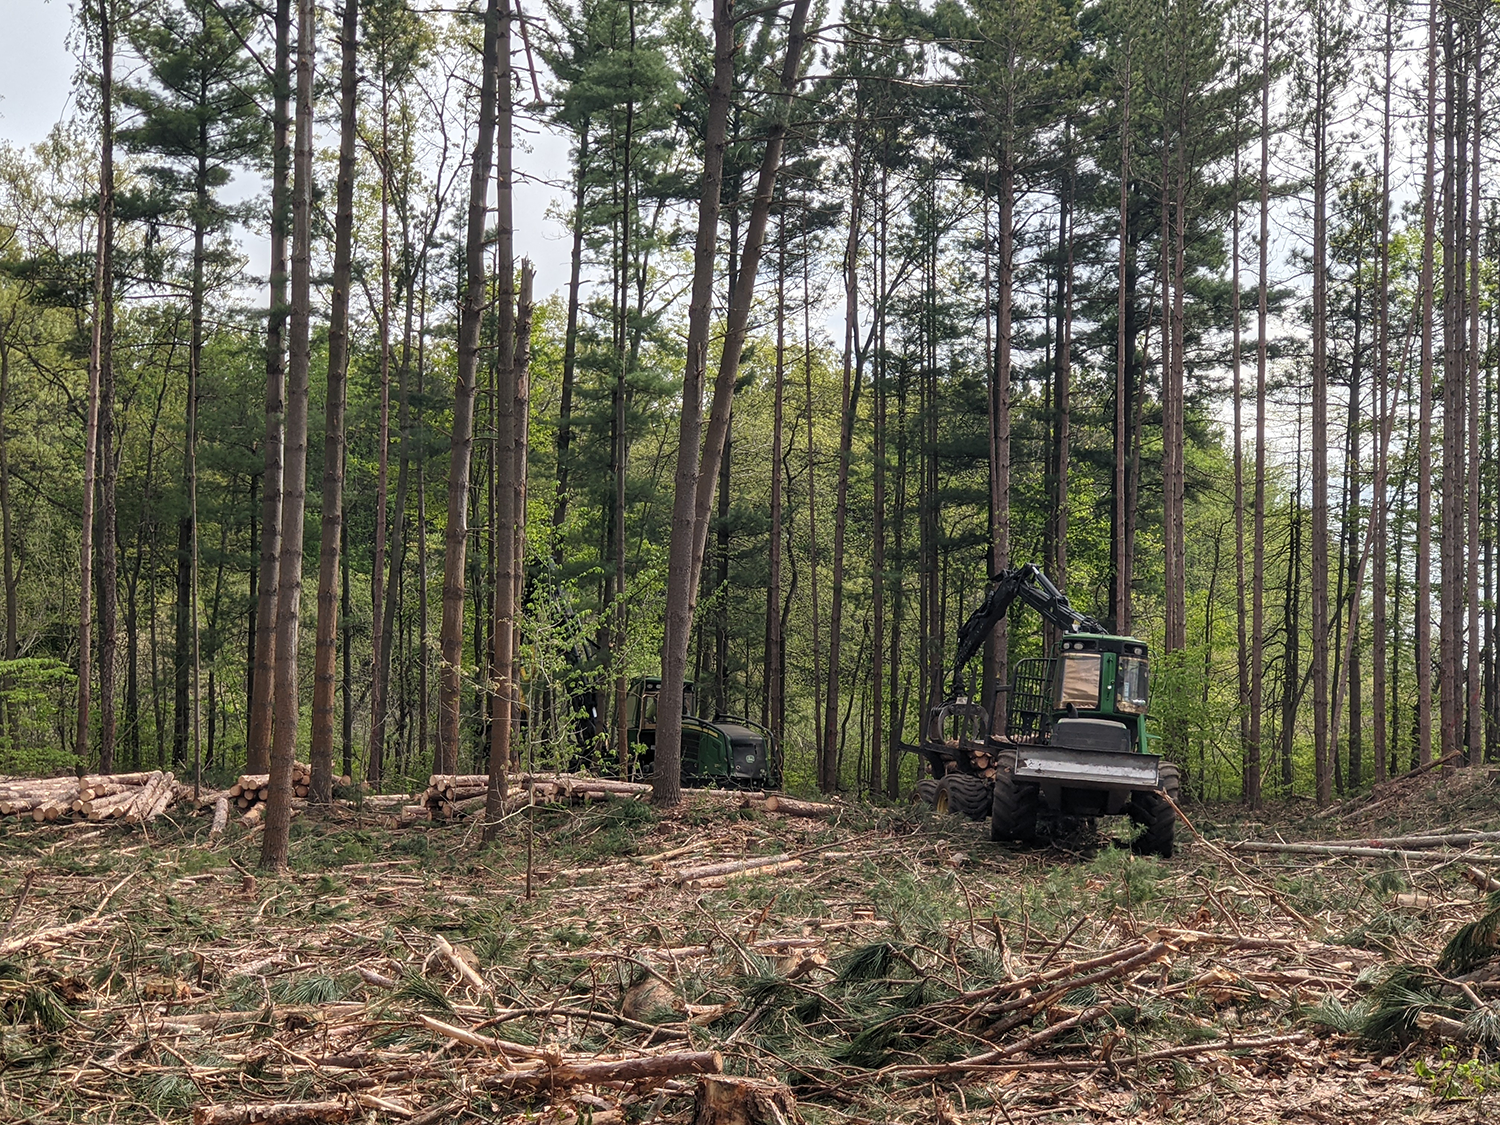 A large piece of equipment removes trees from a forest clearing.